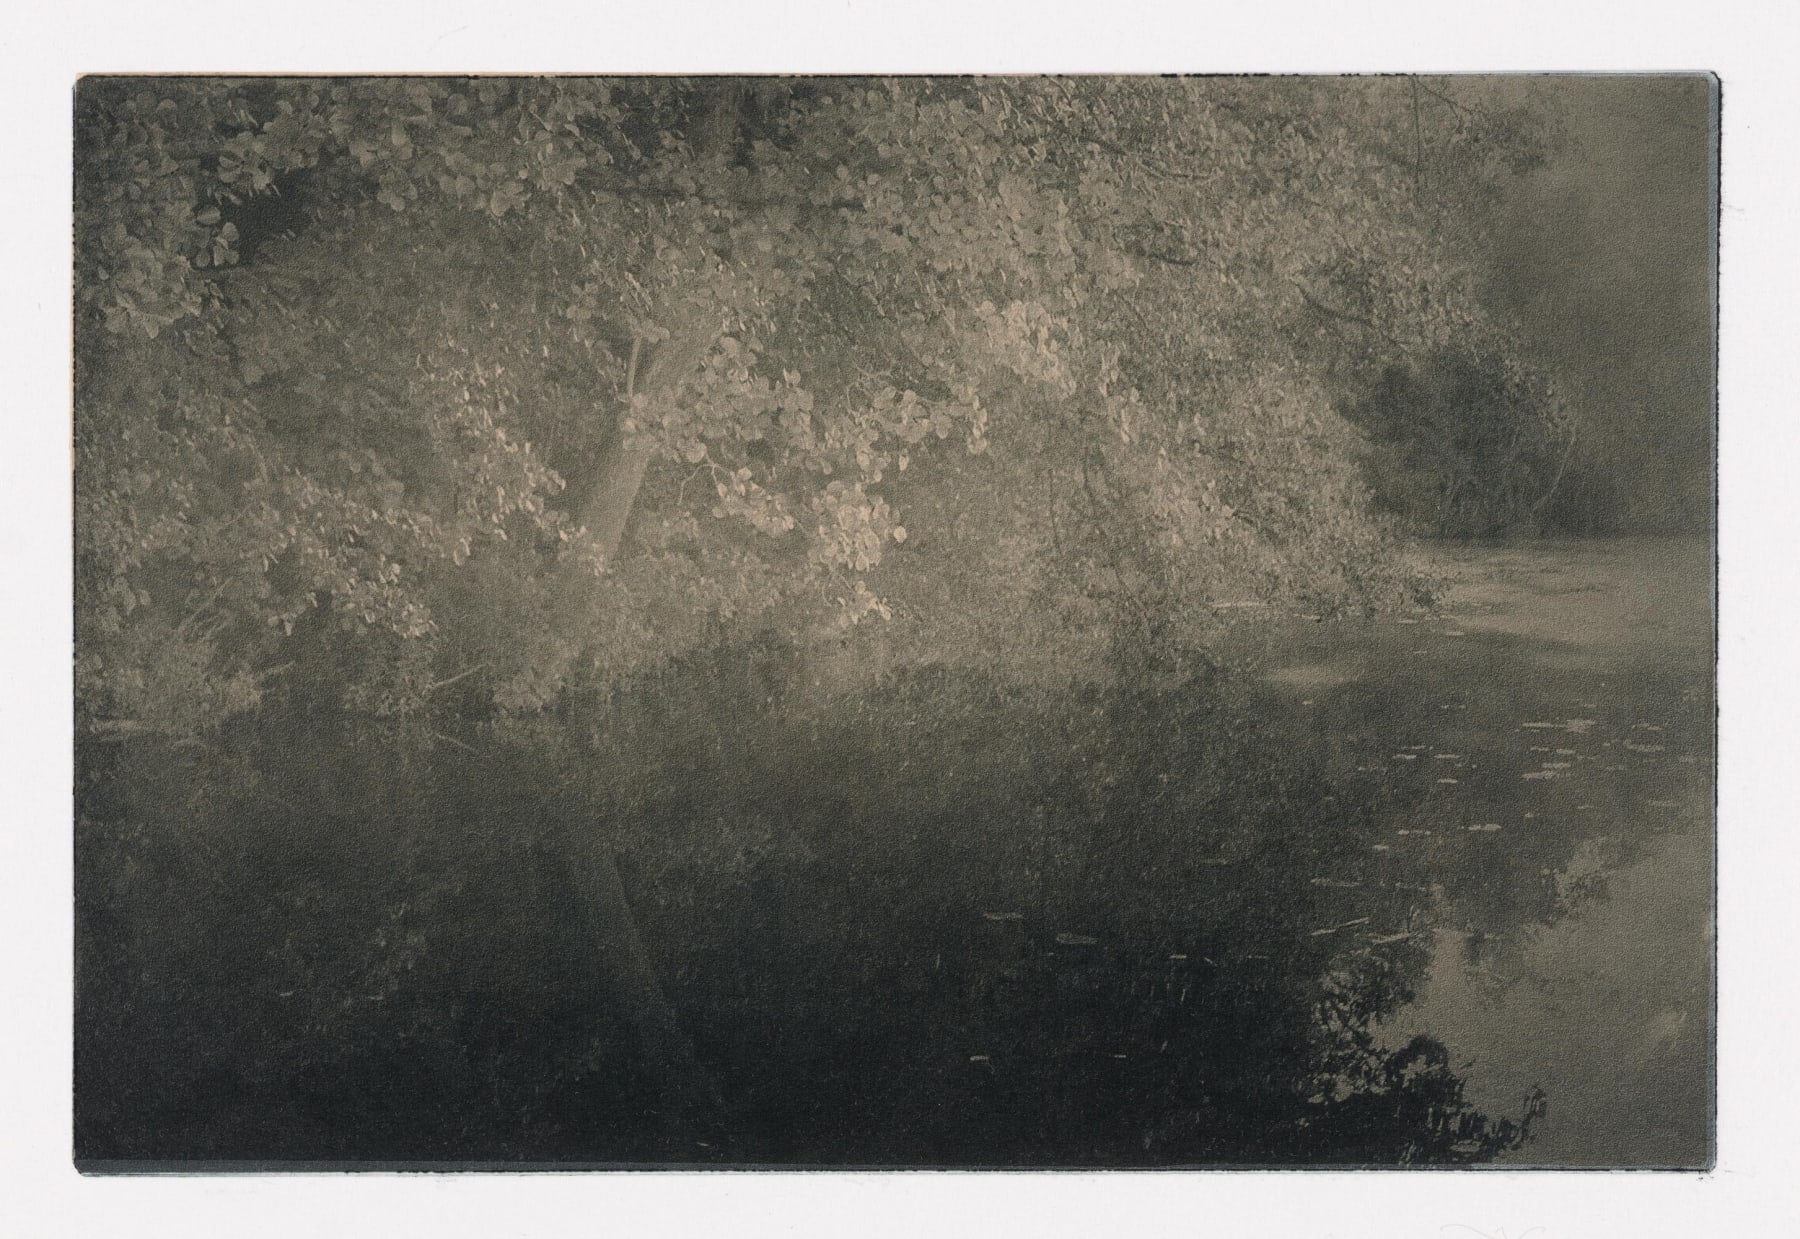 Delicate Reflection I Photogravure Etching and Chin Collé 36.5 x 28.5cm Edition of 4 plus 1 artist's proof $ 700.00